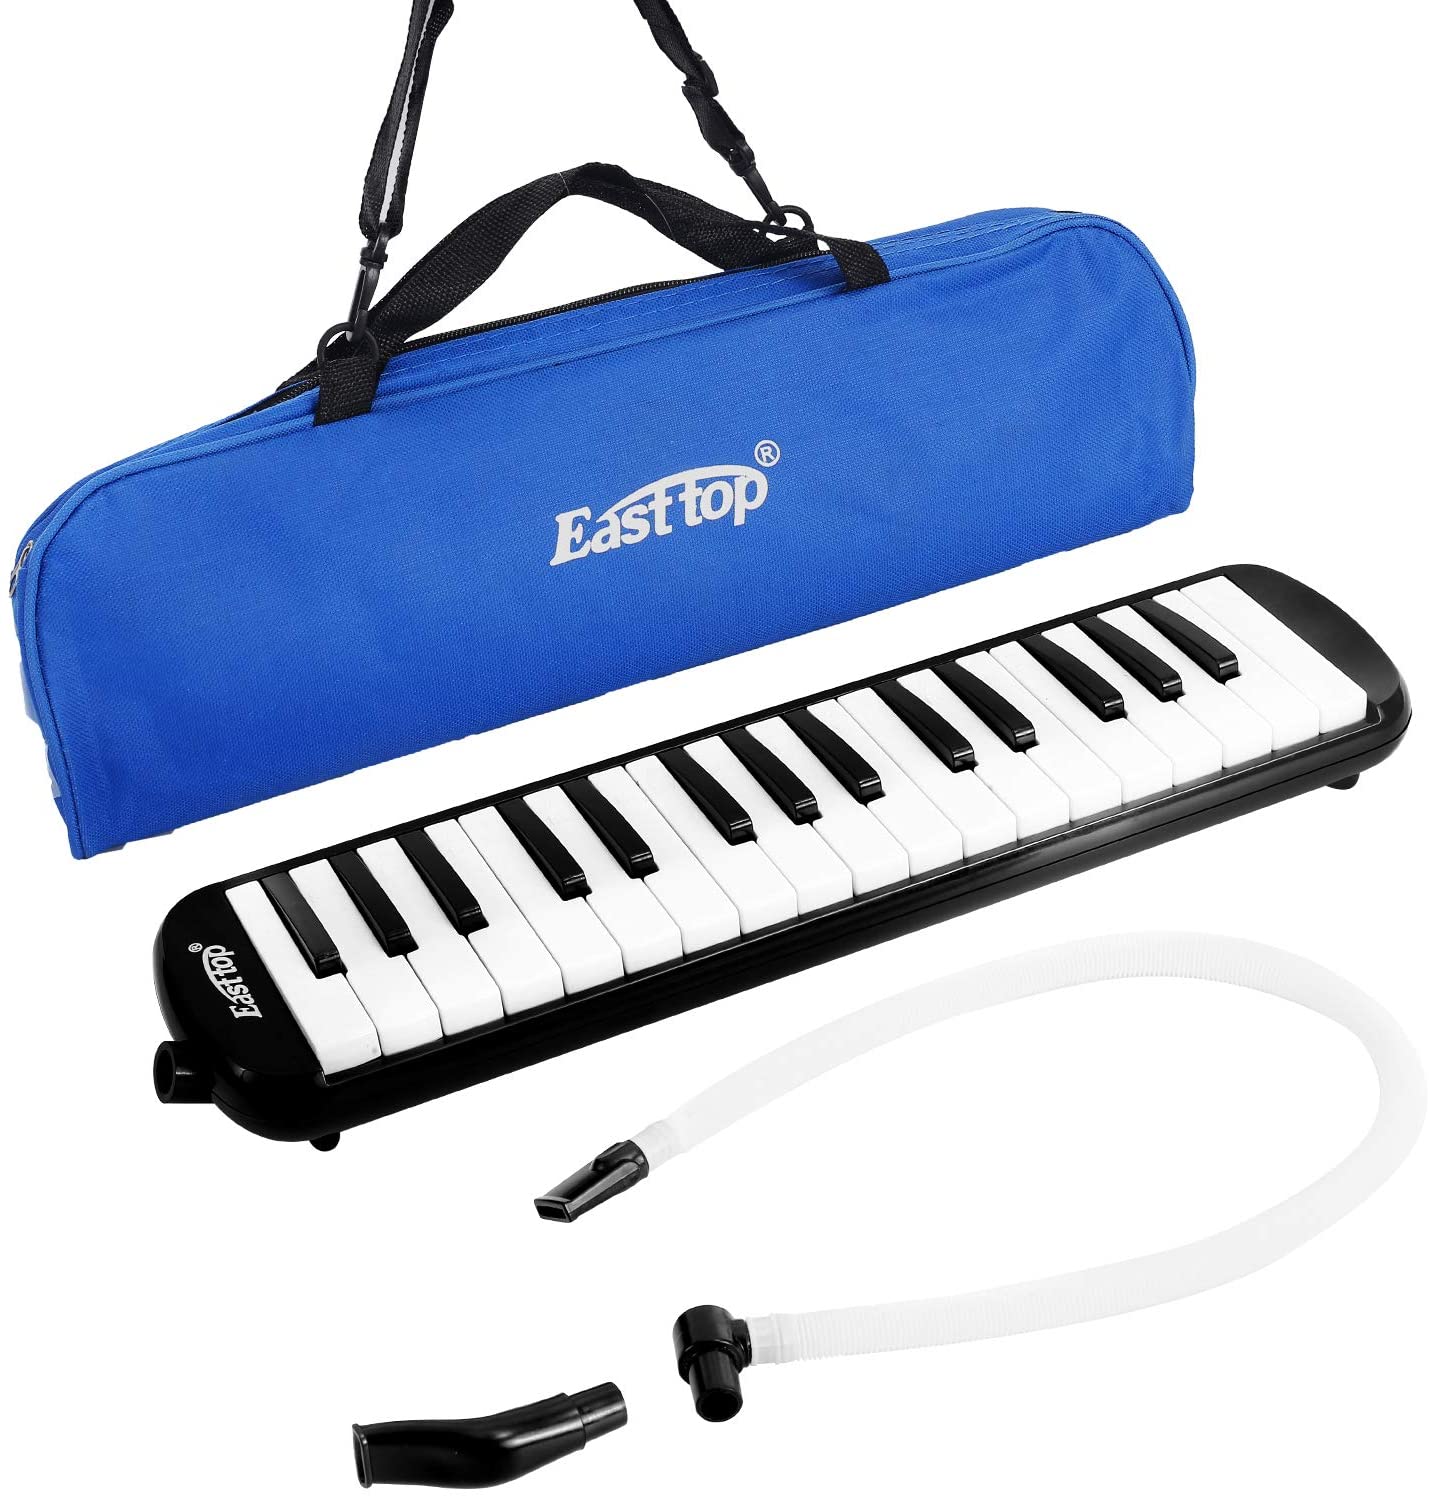 East top 32-Key Professional Mouth Melodica, Instrument Mouth Keyboard Organ Melodica Set-Black - Easttop harmonica store